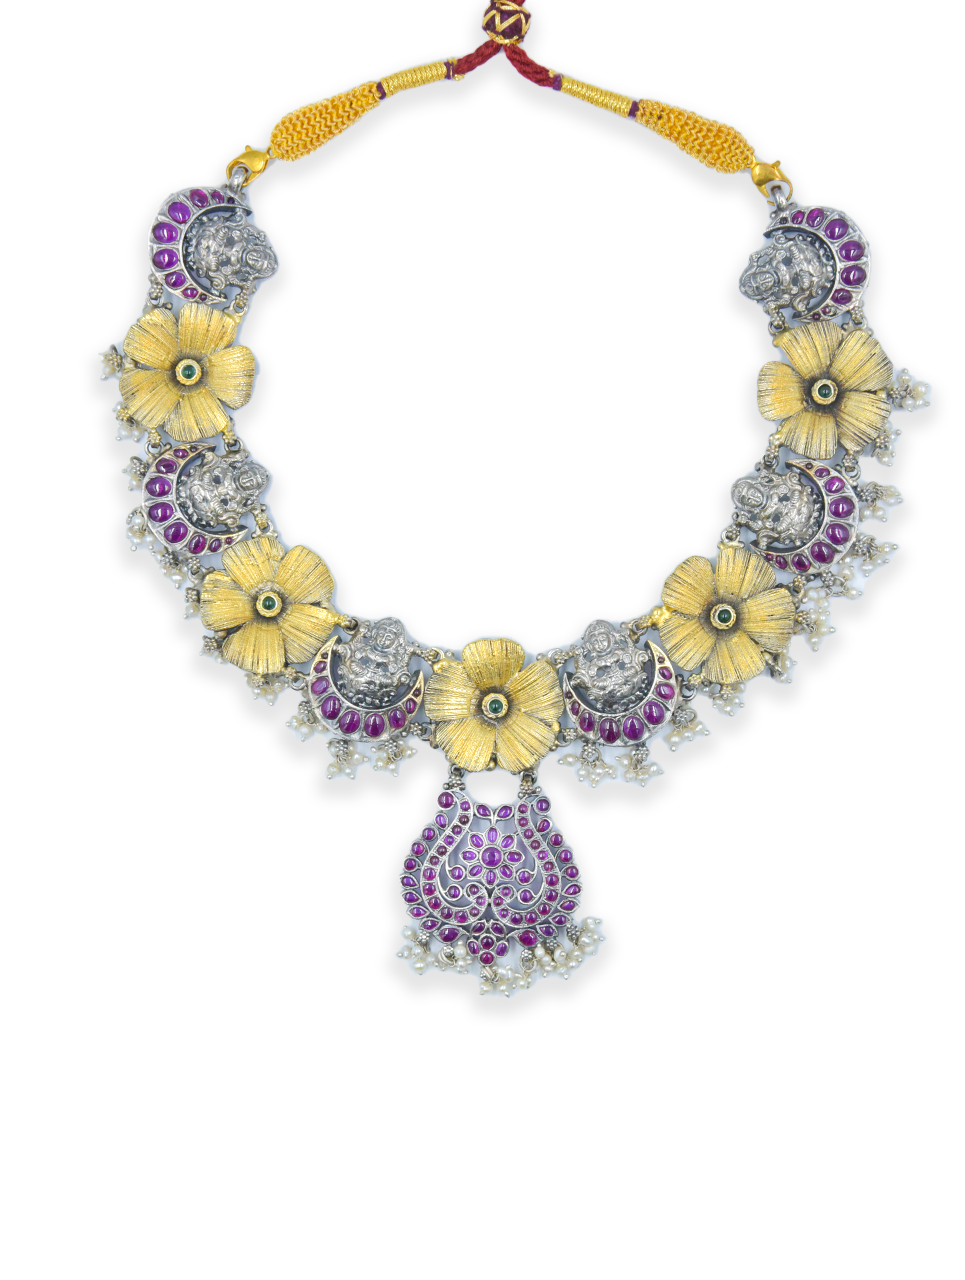 IBAADAT NECKLACE (STYLE 397)